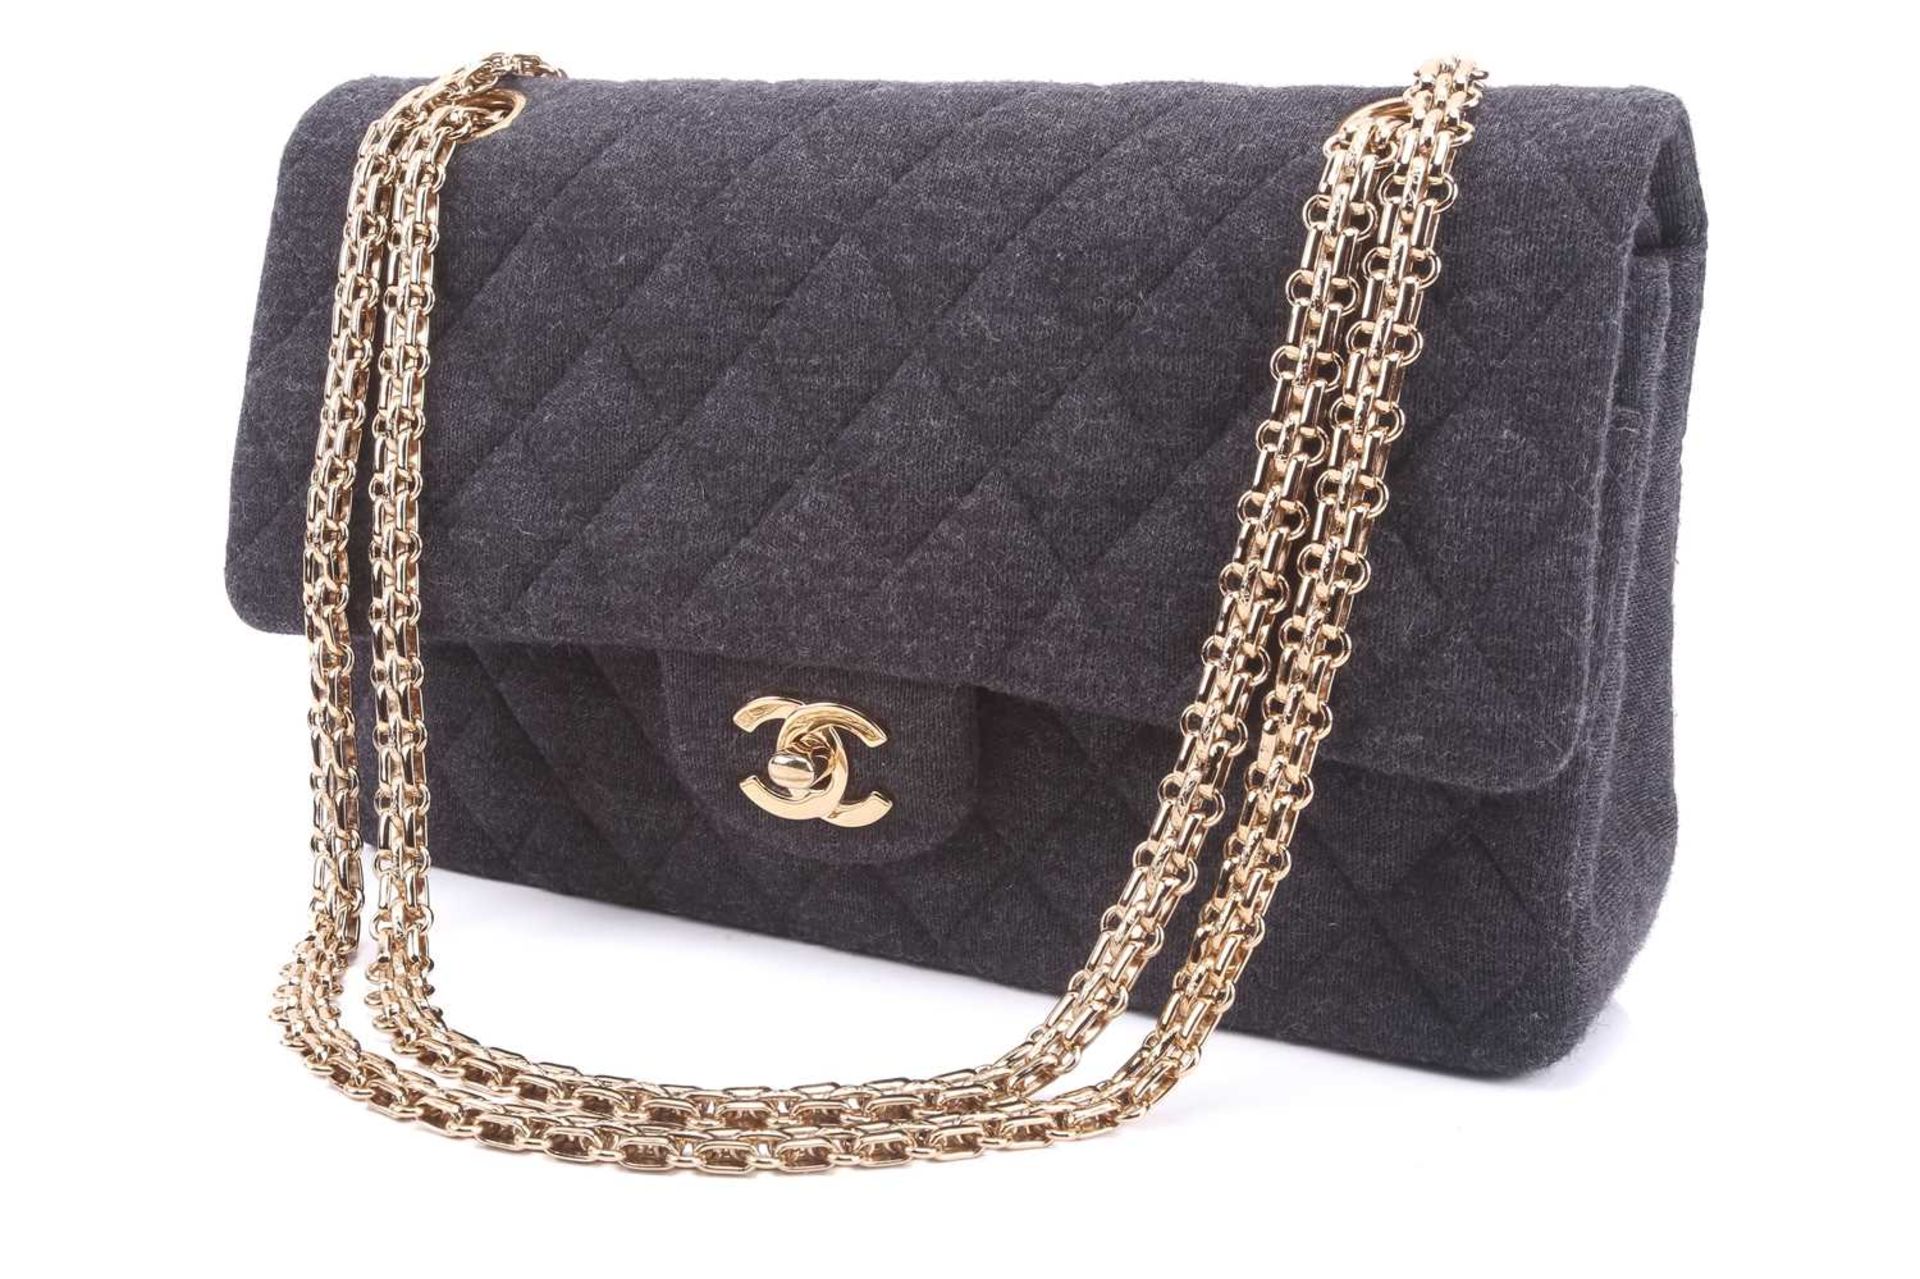 Chanel - a classic double flap bag in charcoal grey jersey fabric, circa 2002, rectangular body with - Image 12 of 14